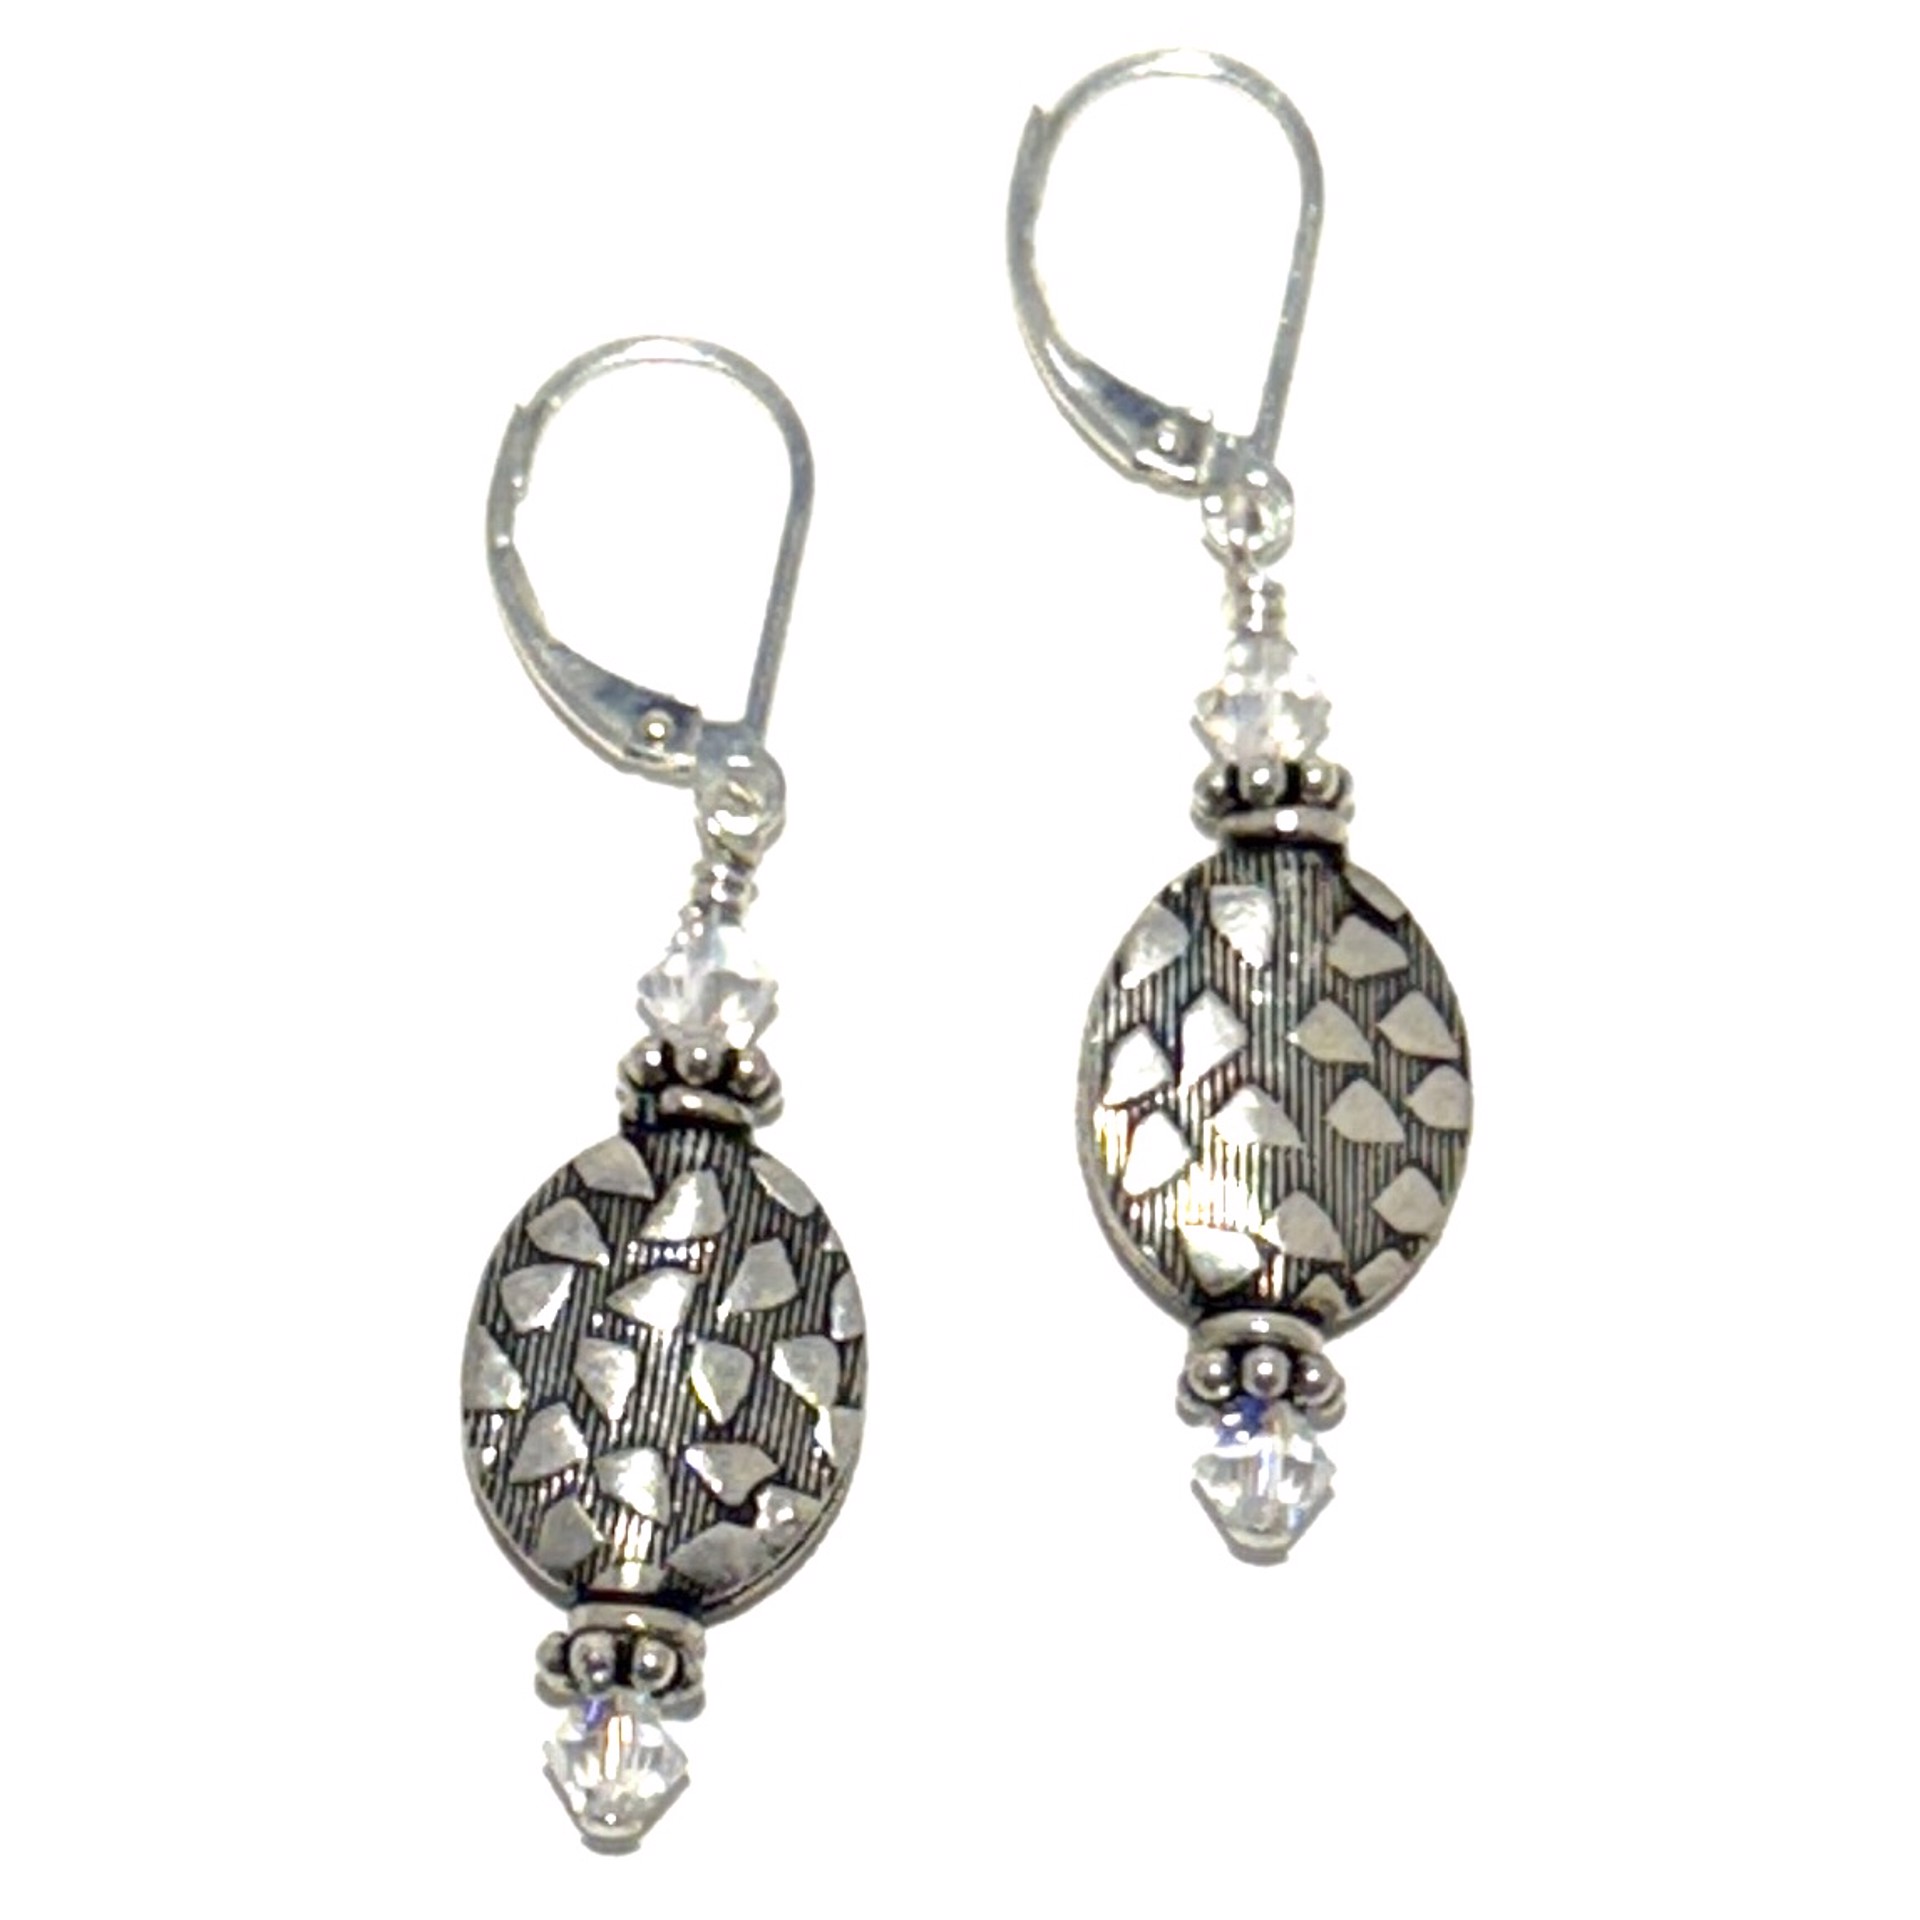 Sterling Silver Bead and Crystal Earrings SHOSH23-49 by Shoshannah Weinisch